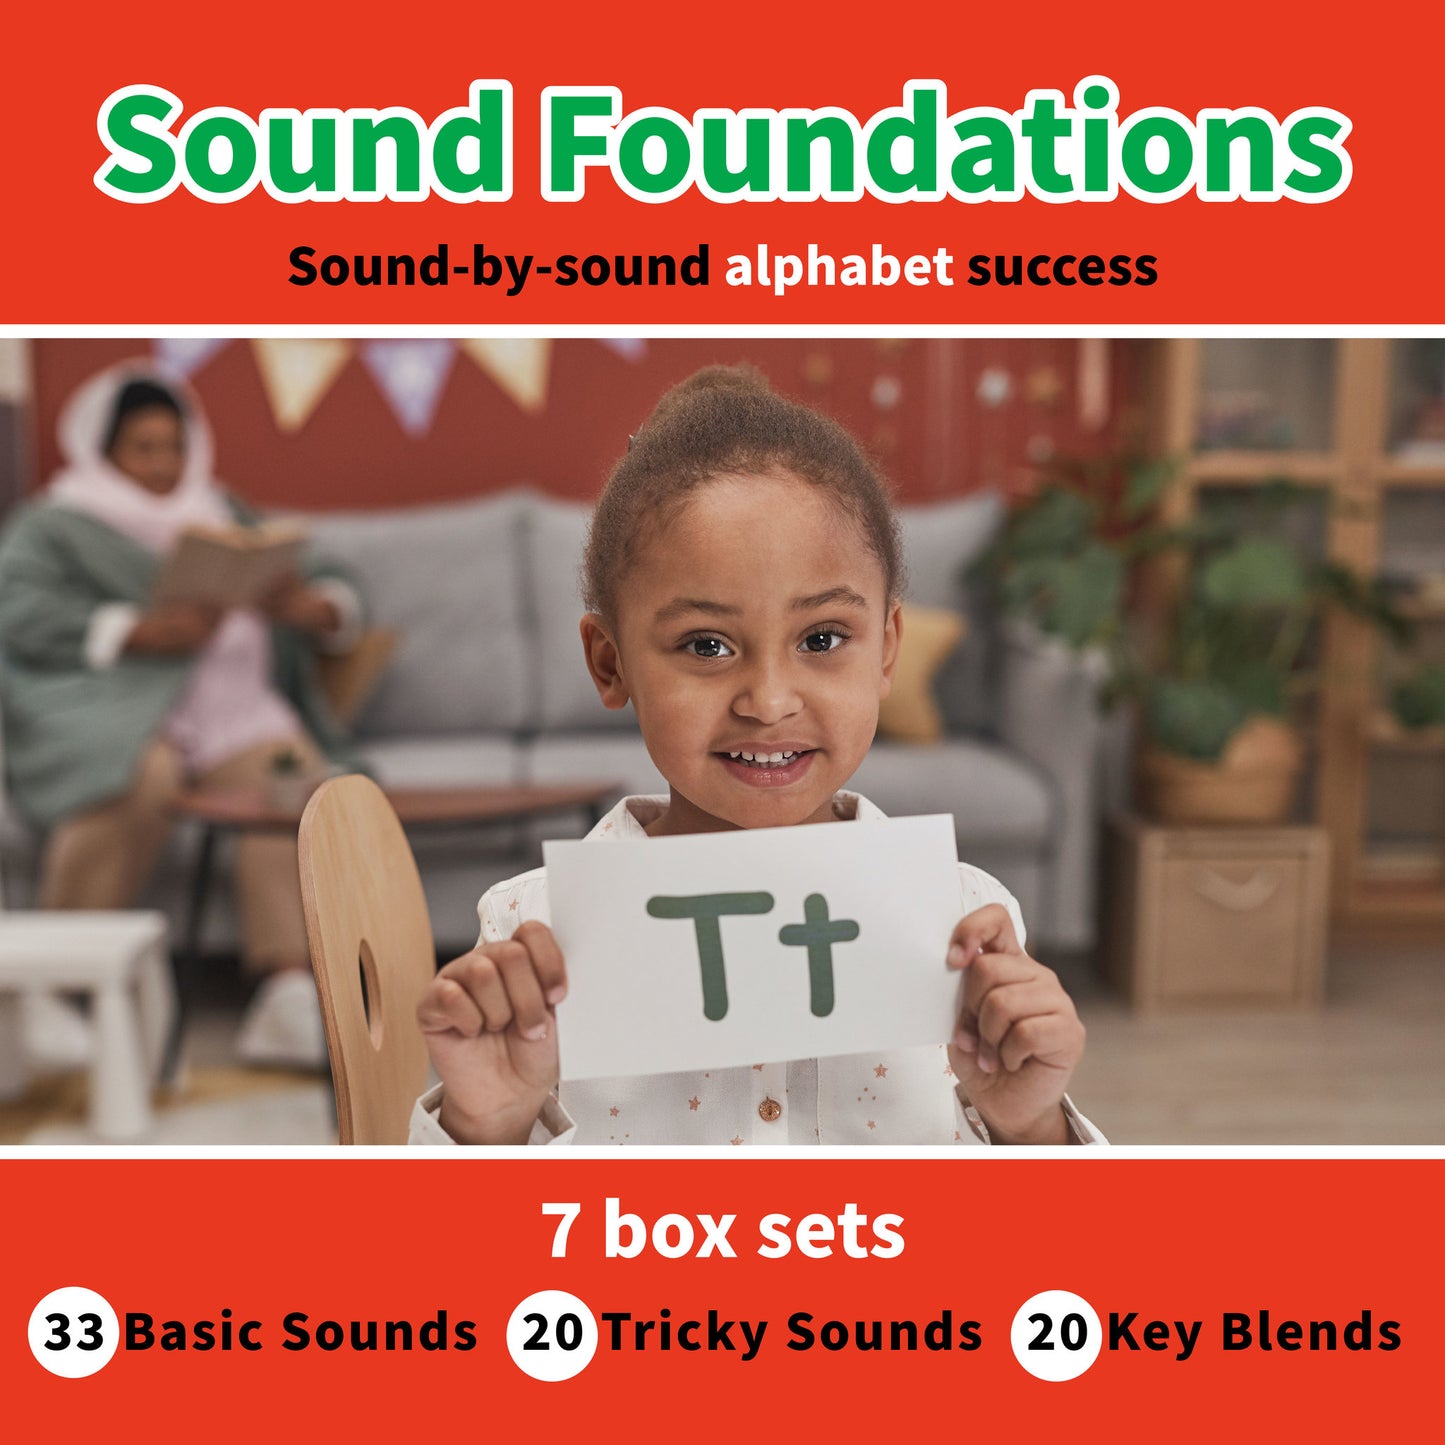 Sound Foundations 3: Let's Learn the Sound / Advanced Consonants